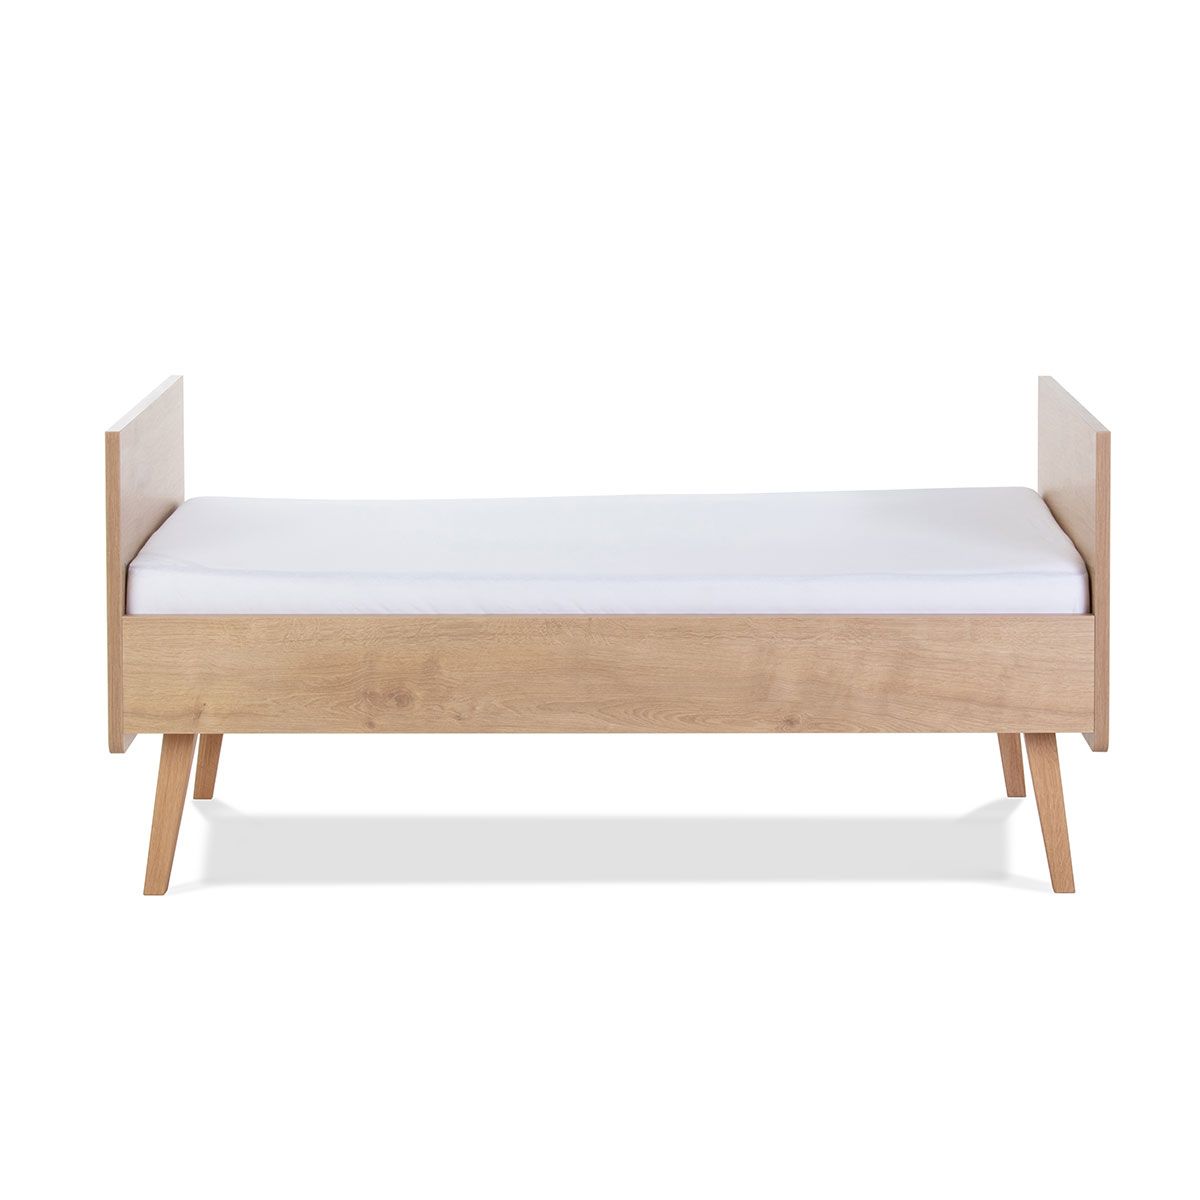 Silver Cross Westport Toddler Bed Straight on in Lifestyle Image